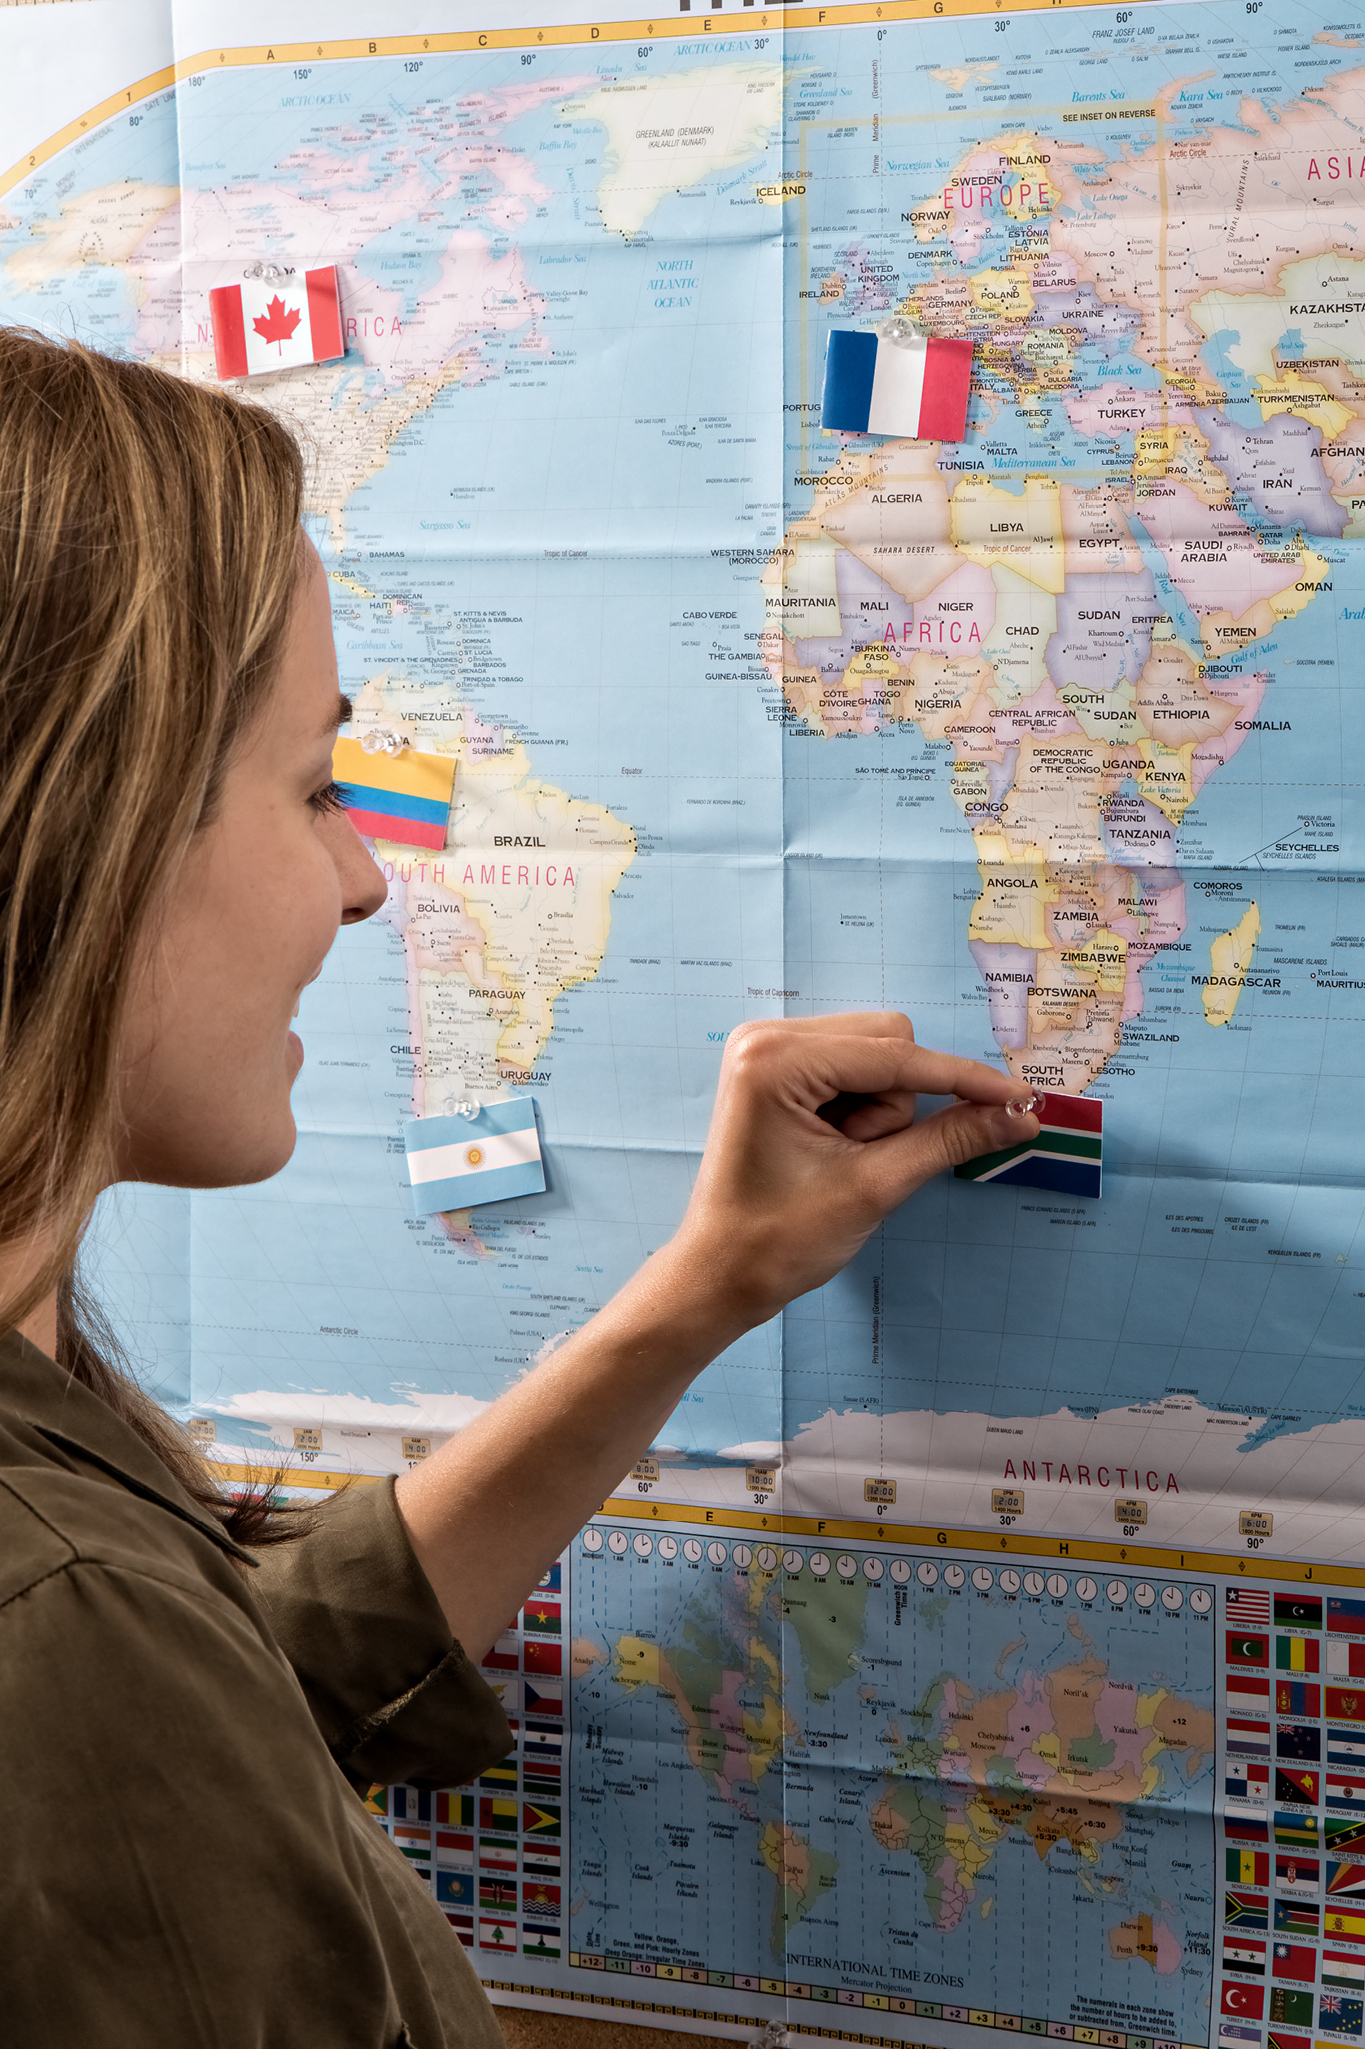 Pinning a flag on a map